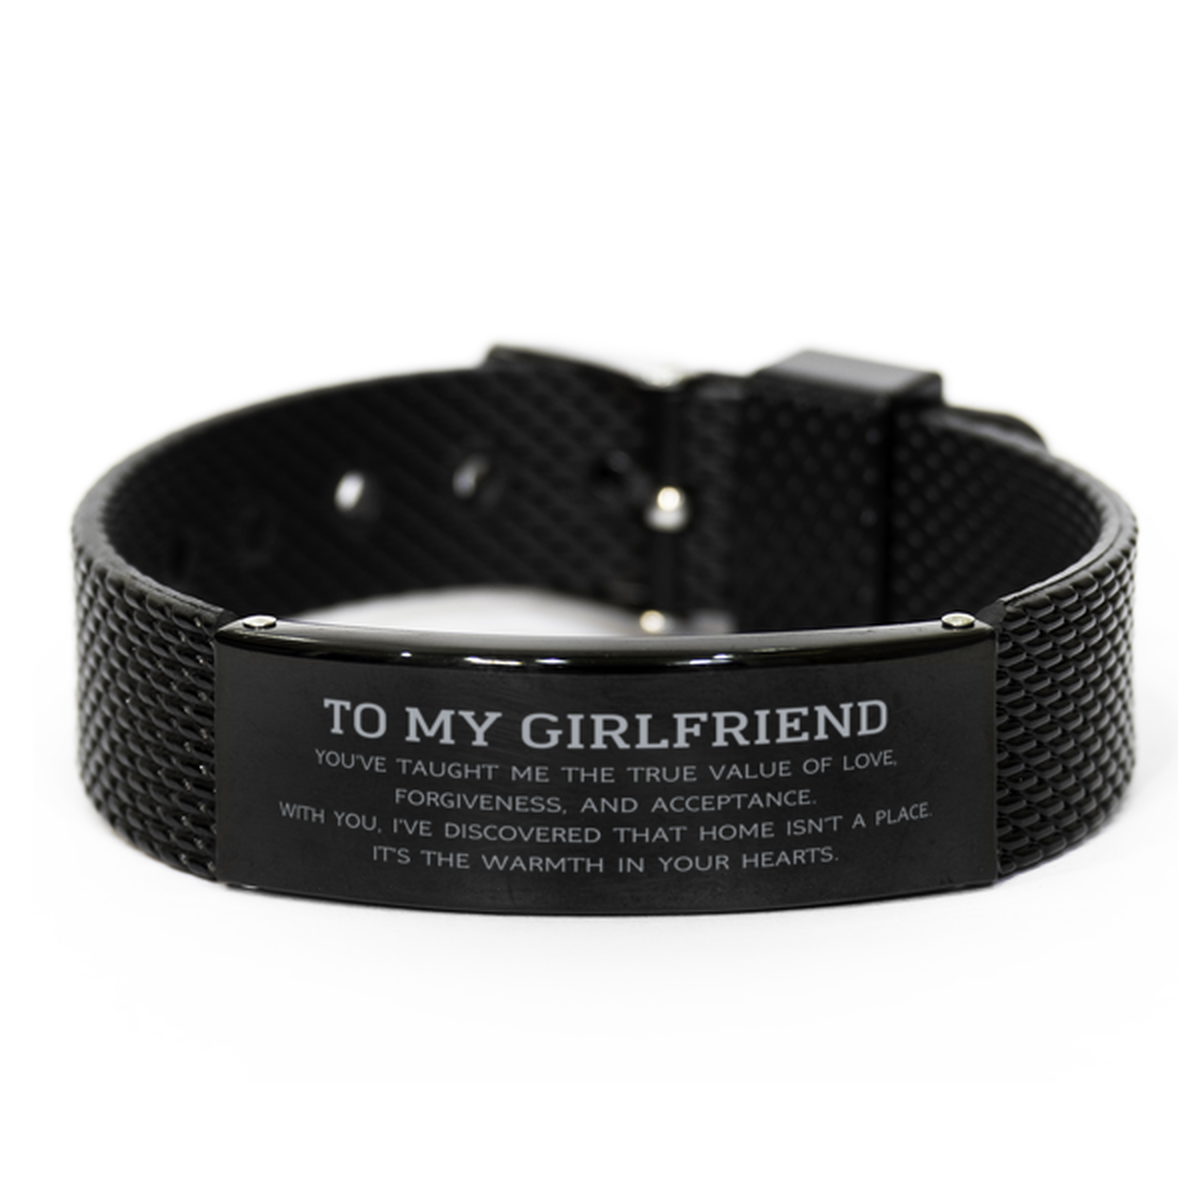 To My Girlfriend Gifts, You've taught me the true value of love, Thank You Gifts For Girlfriend, Birthday Black Shark Mesh Bracelet For Girlfriend